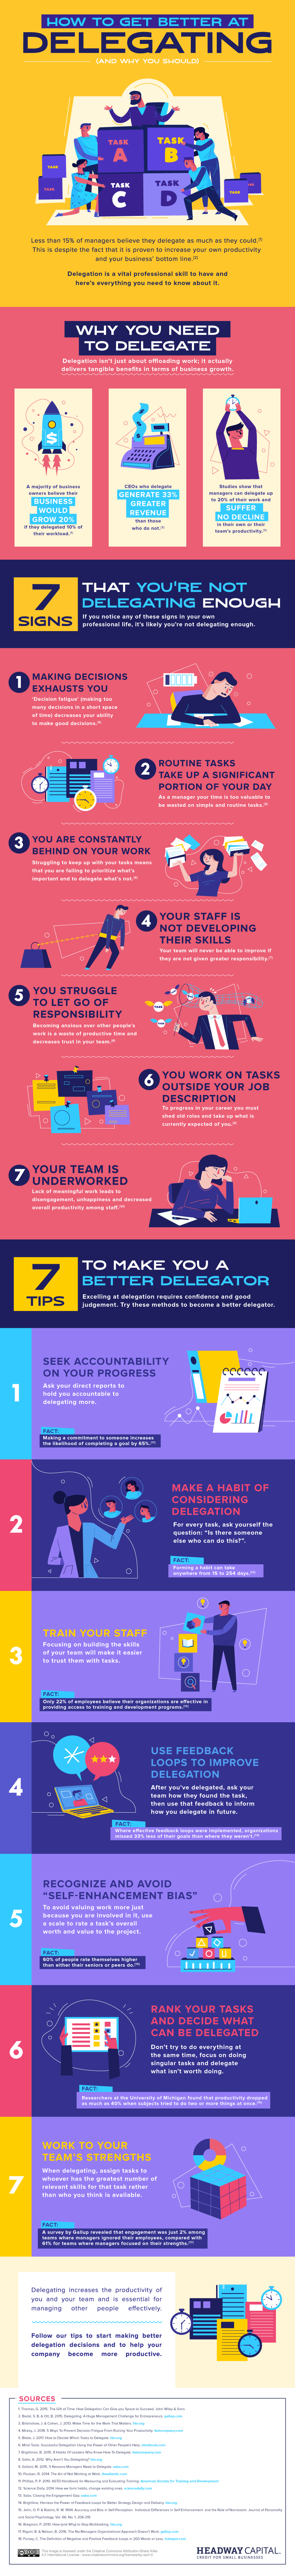 00_How-to-get-better-at-delegating_infographic